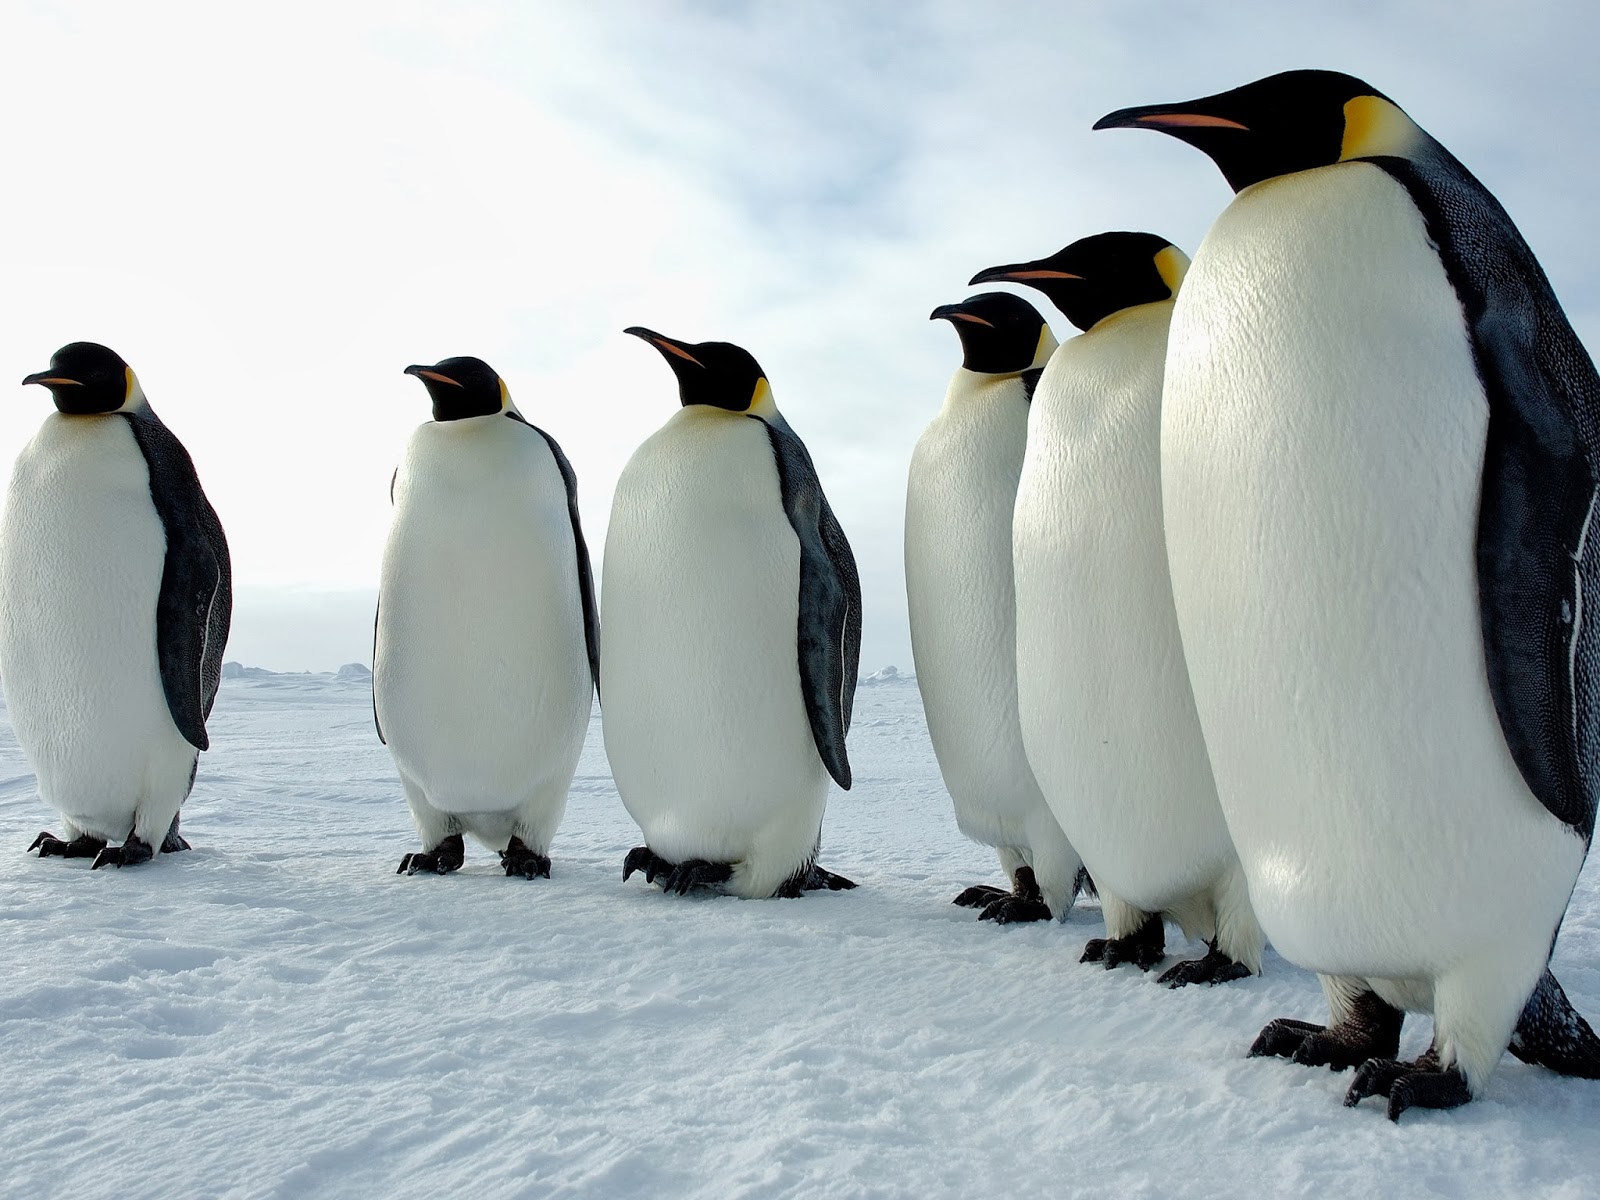 Penguins
linux Penguin Wallpapers Group - Disappointed Penguin - HD Wallpaper 